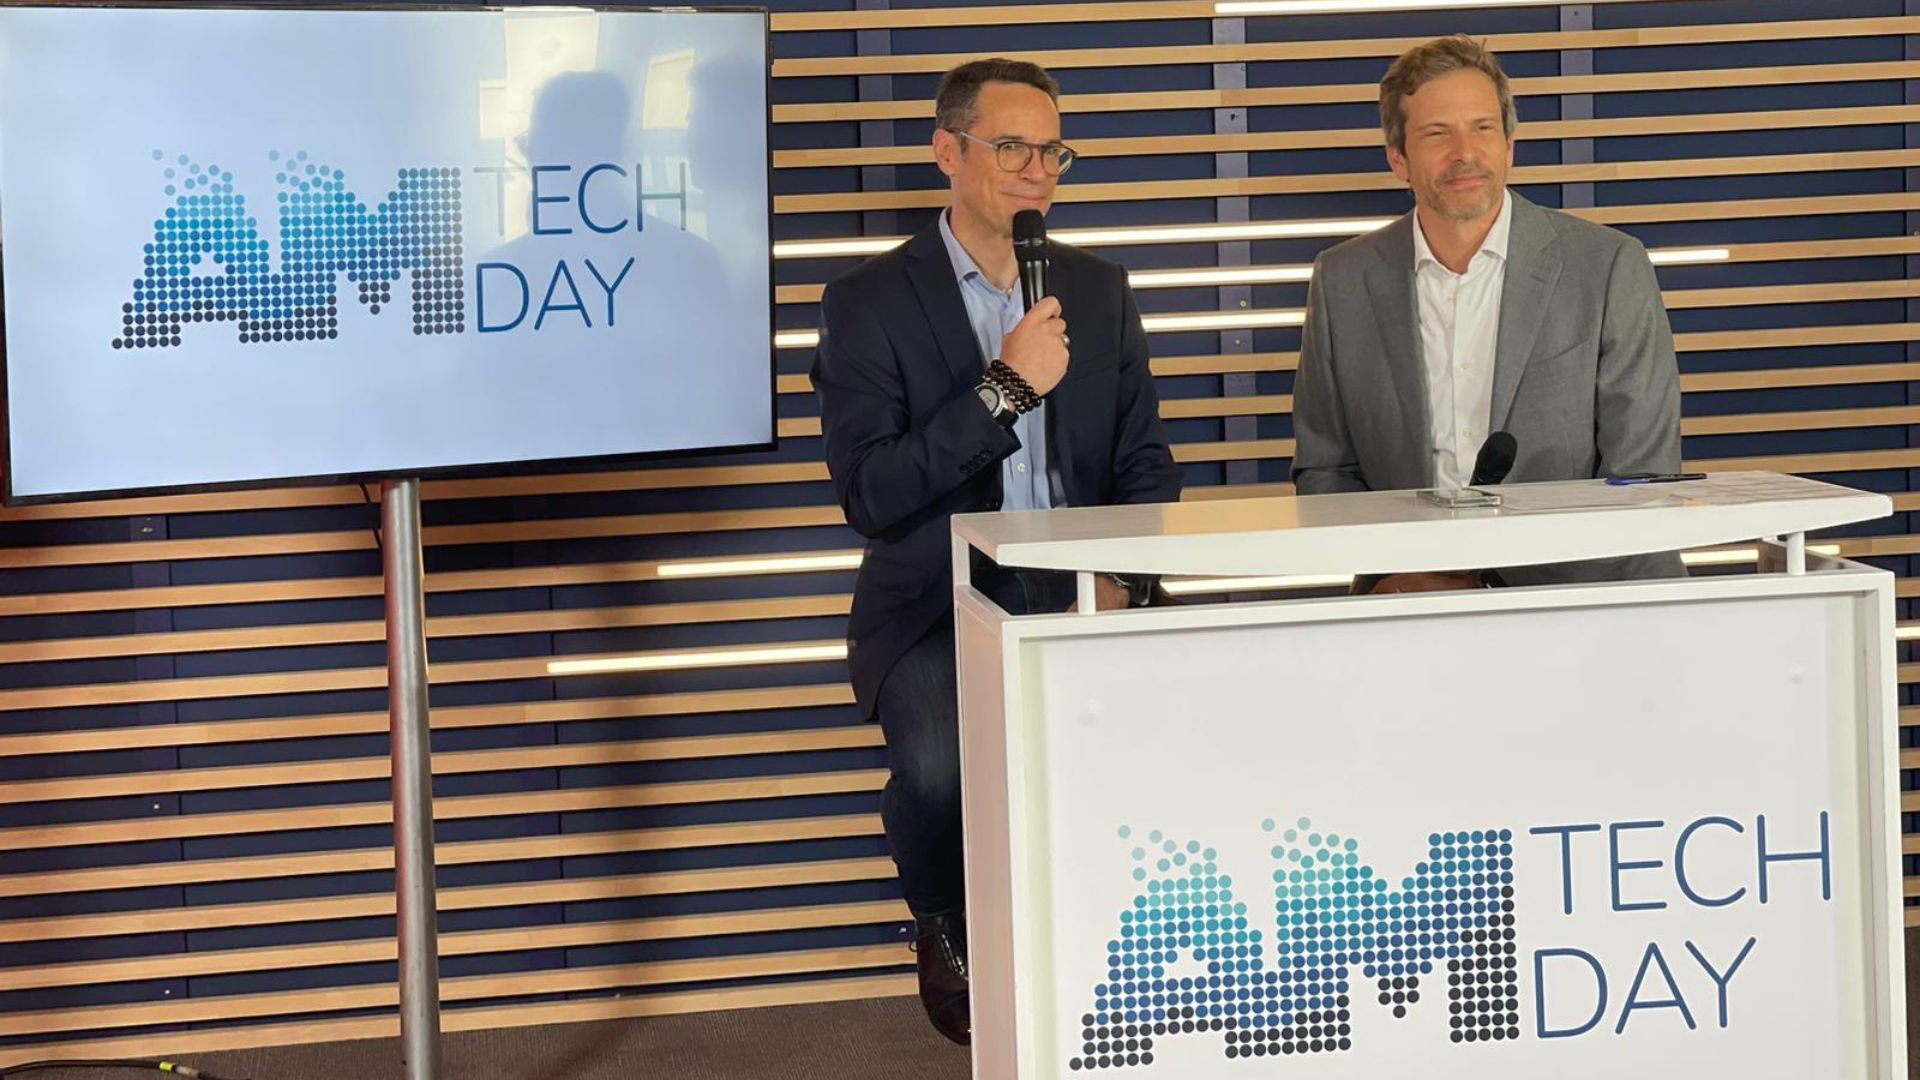 Interview with Olivier Chosson, Director of Operations at Novelis, at AM Tech Day